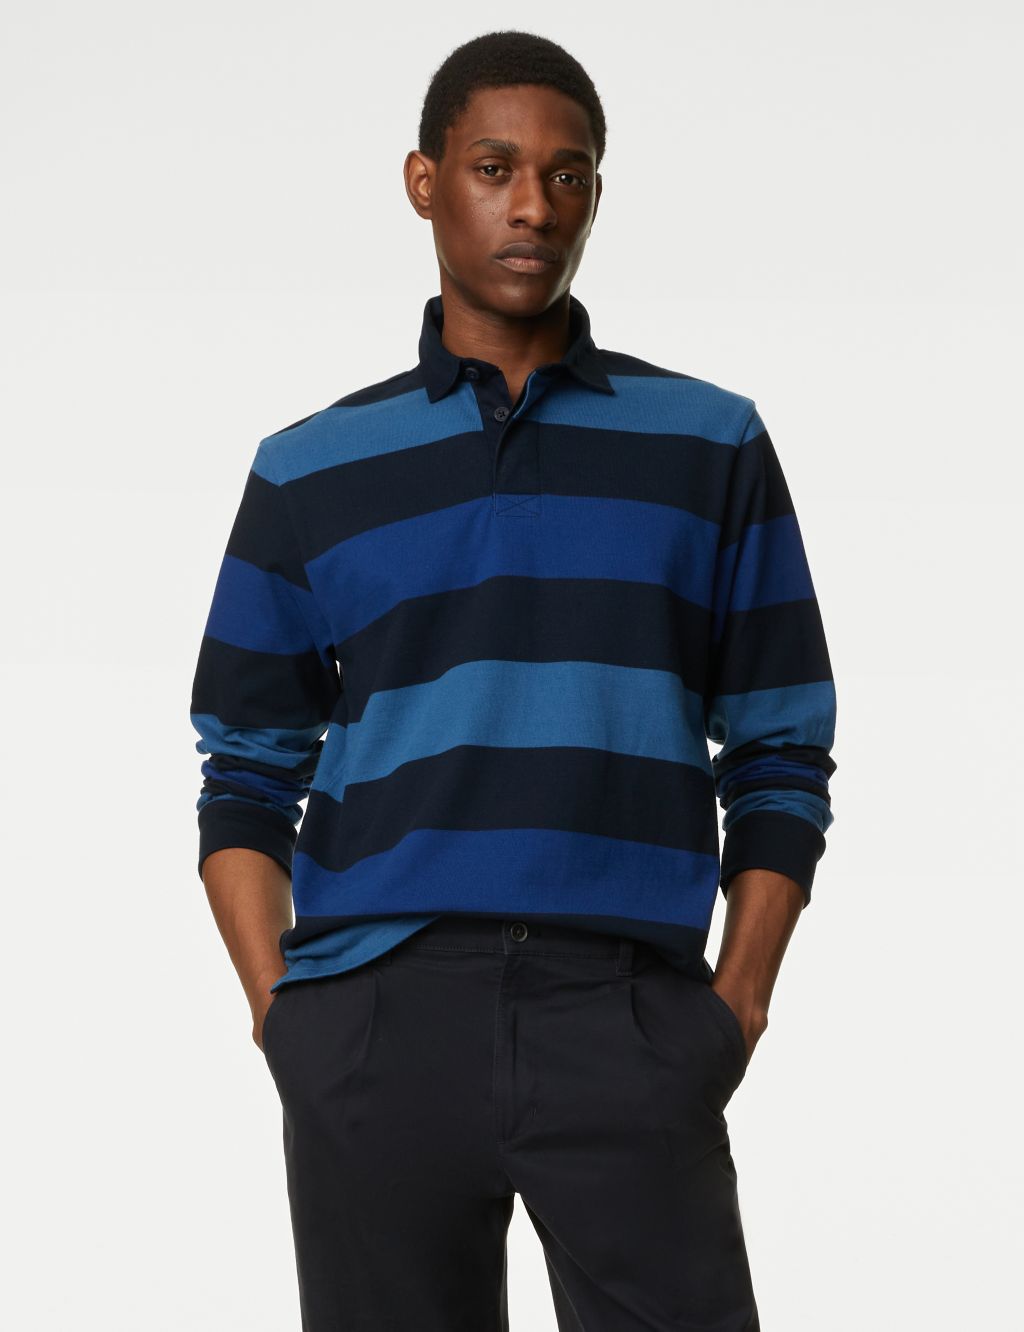 Pure Cotton Striped Rugby Shirt | M&S Collection | M&S